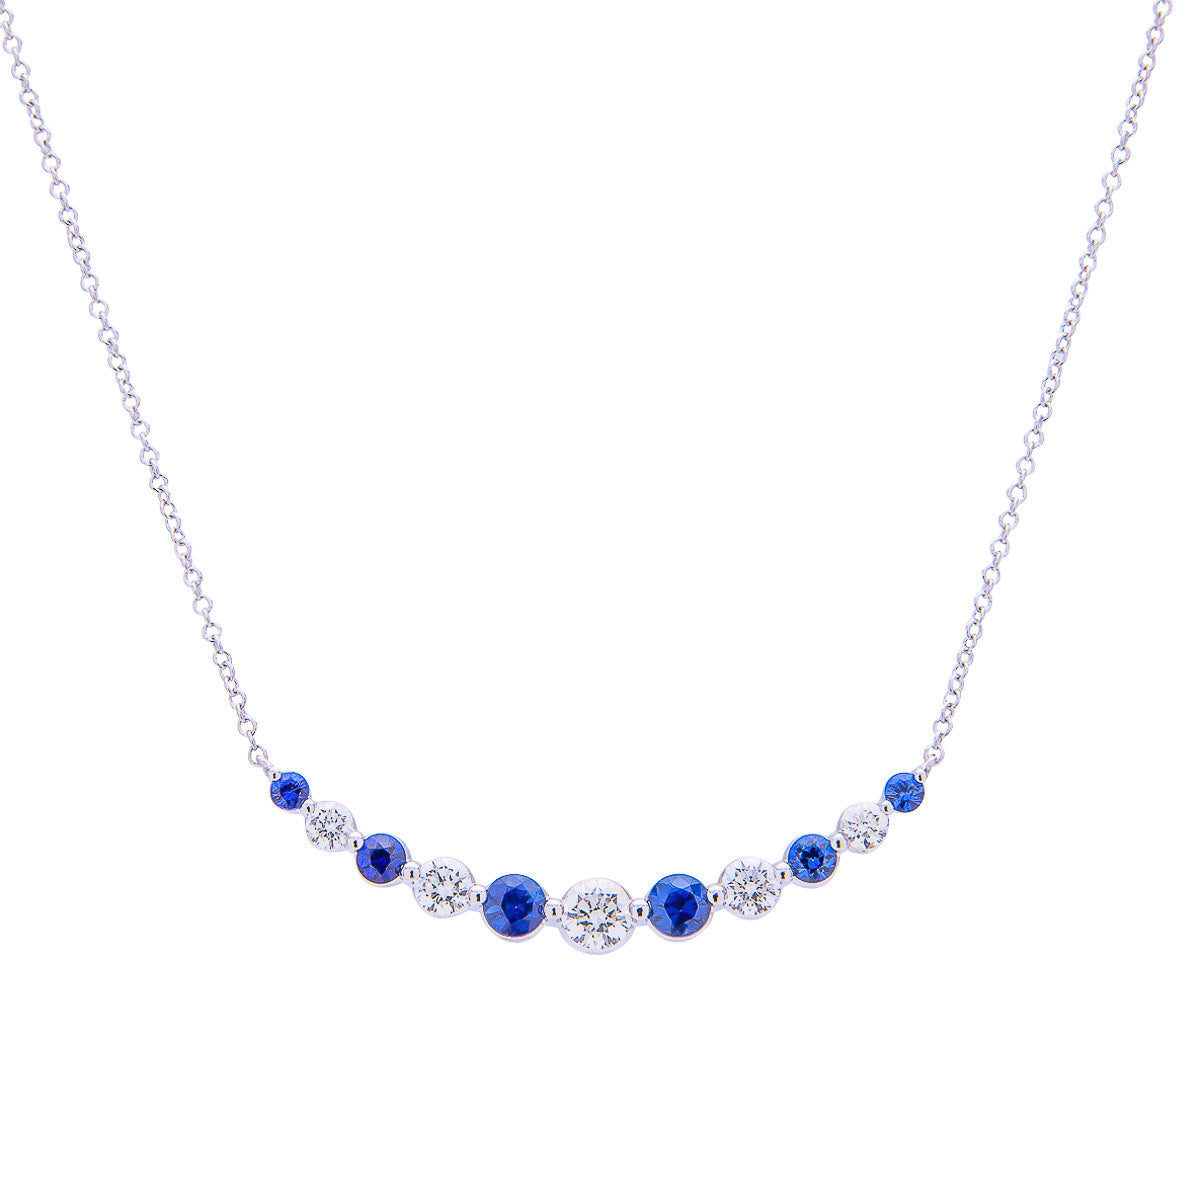 Sabel Collection White Gold Round Diamond and Sapphire Curved Bar Necklace